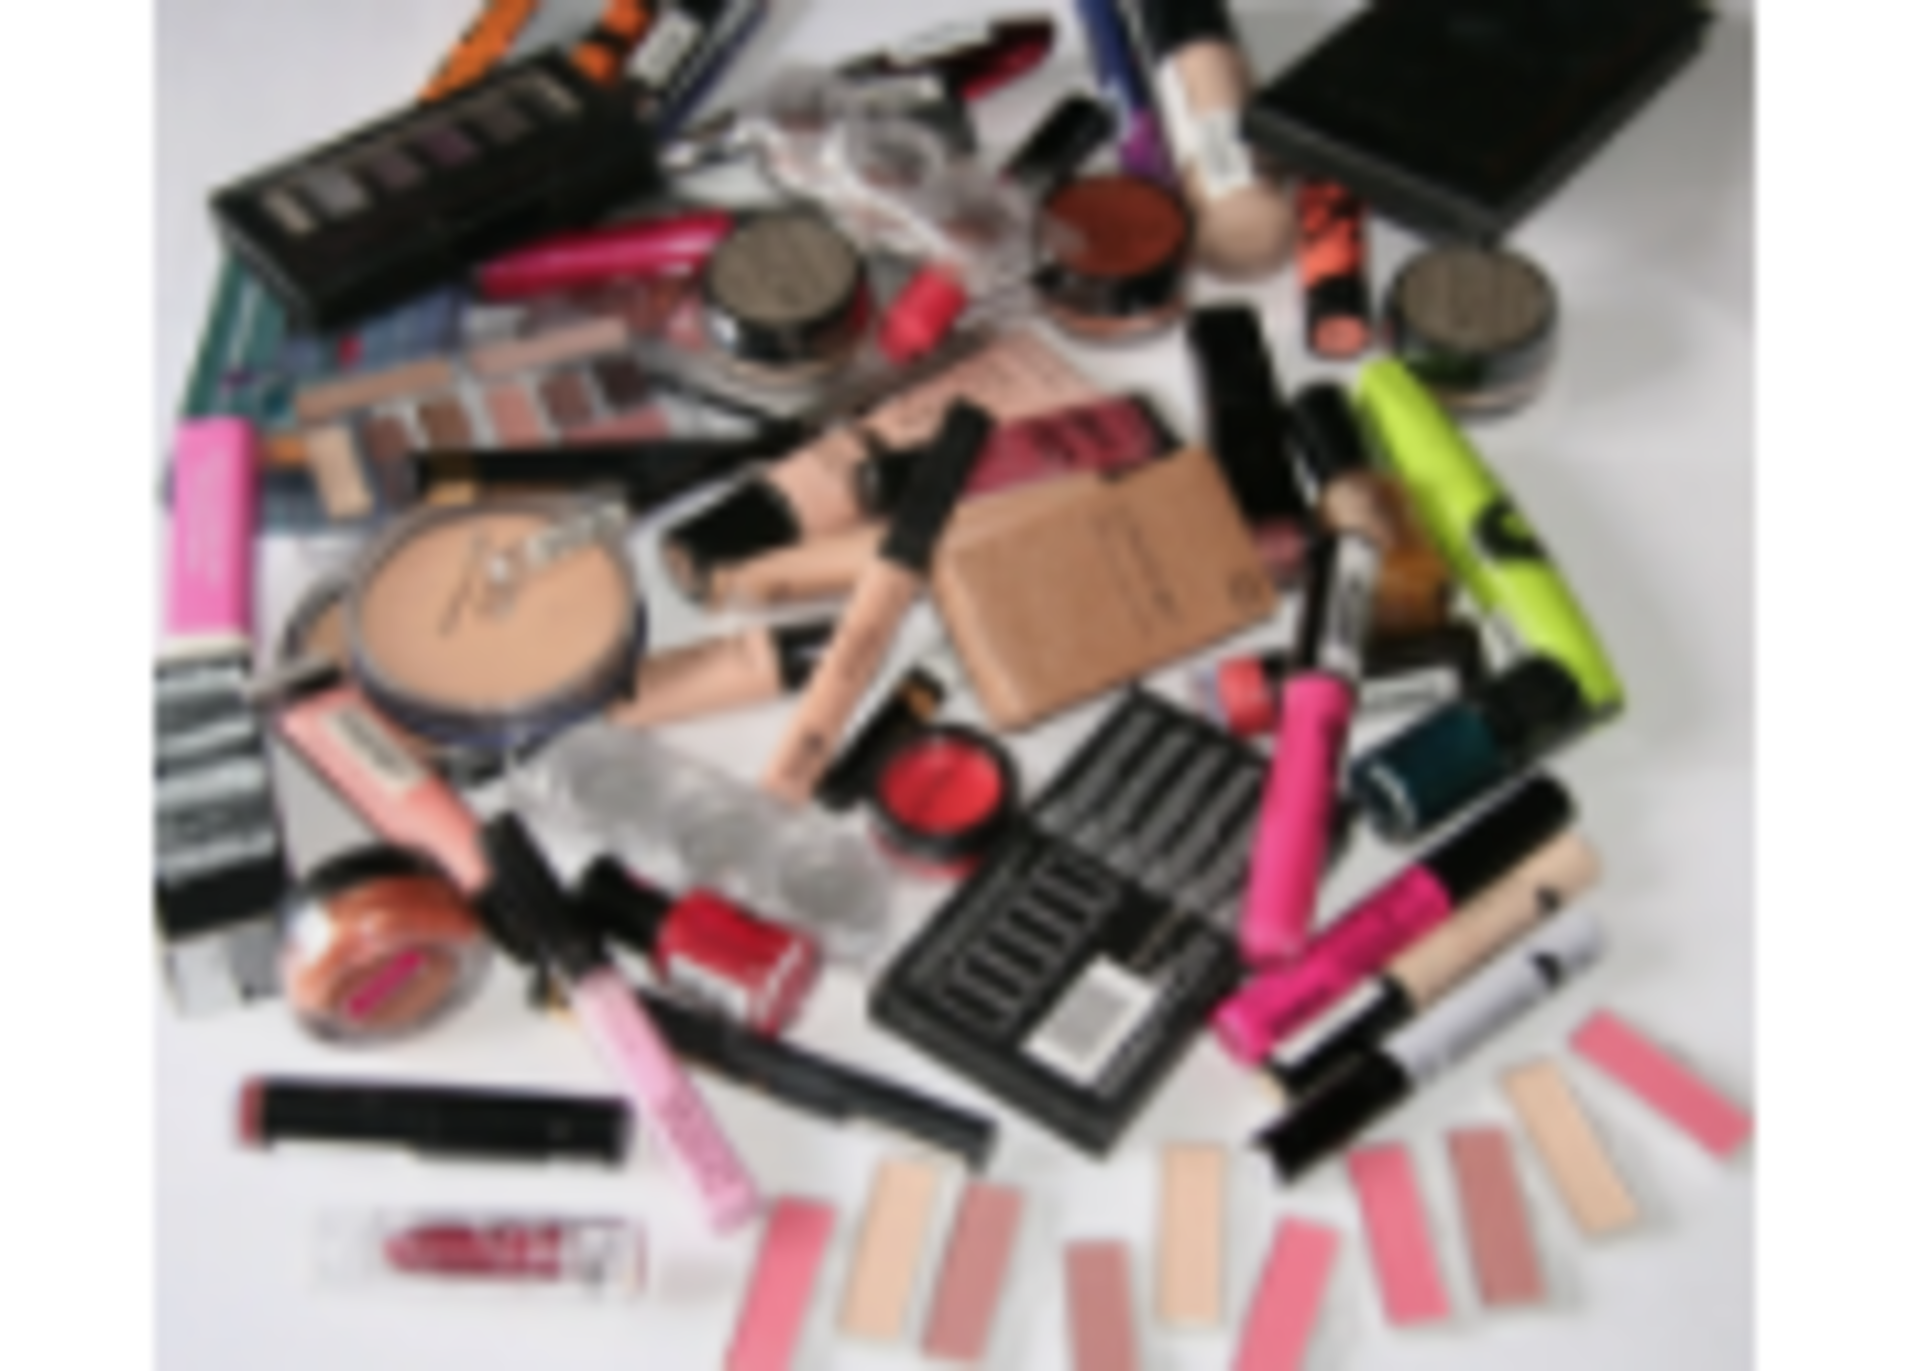 69 X BRANDED COSMETICS MIXED BAG | RRP £200+ - Image 3 of 3